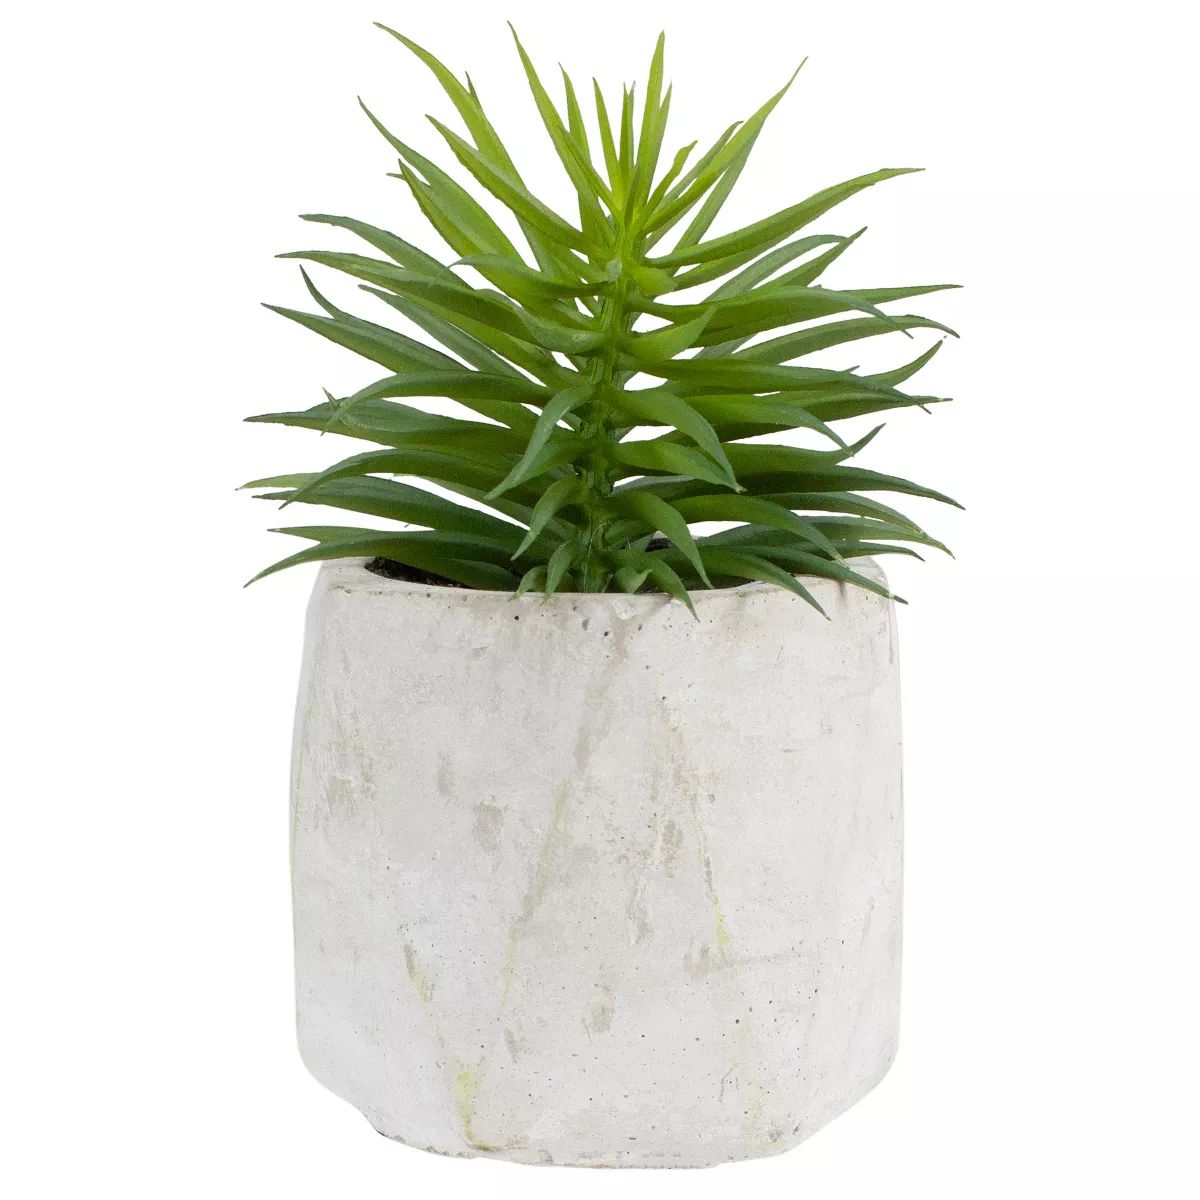 Northlight 5.5" Potted Artificial Succulent in Cement Pot | Target